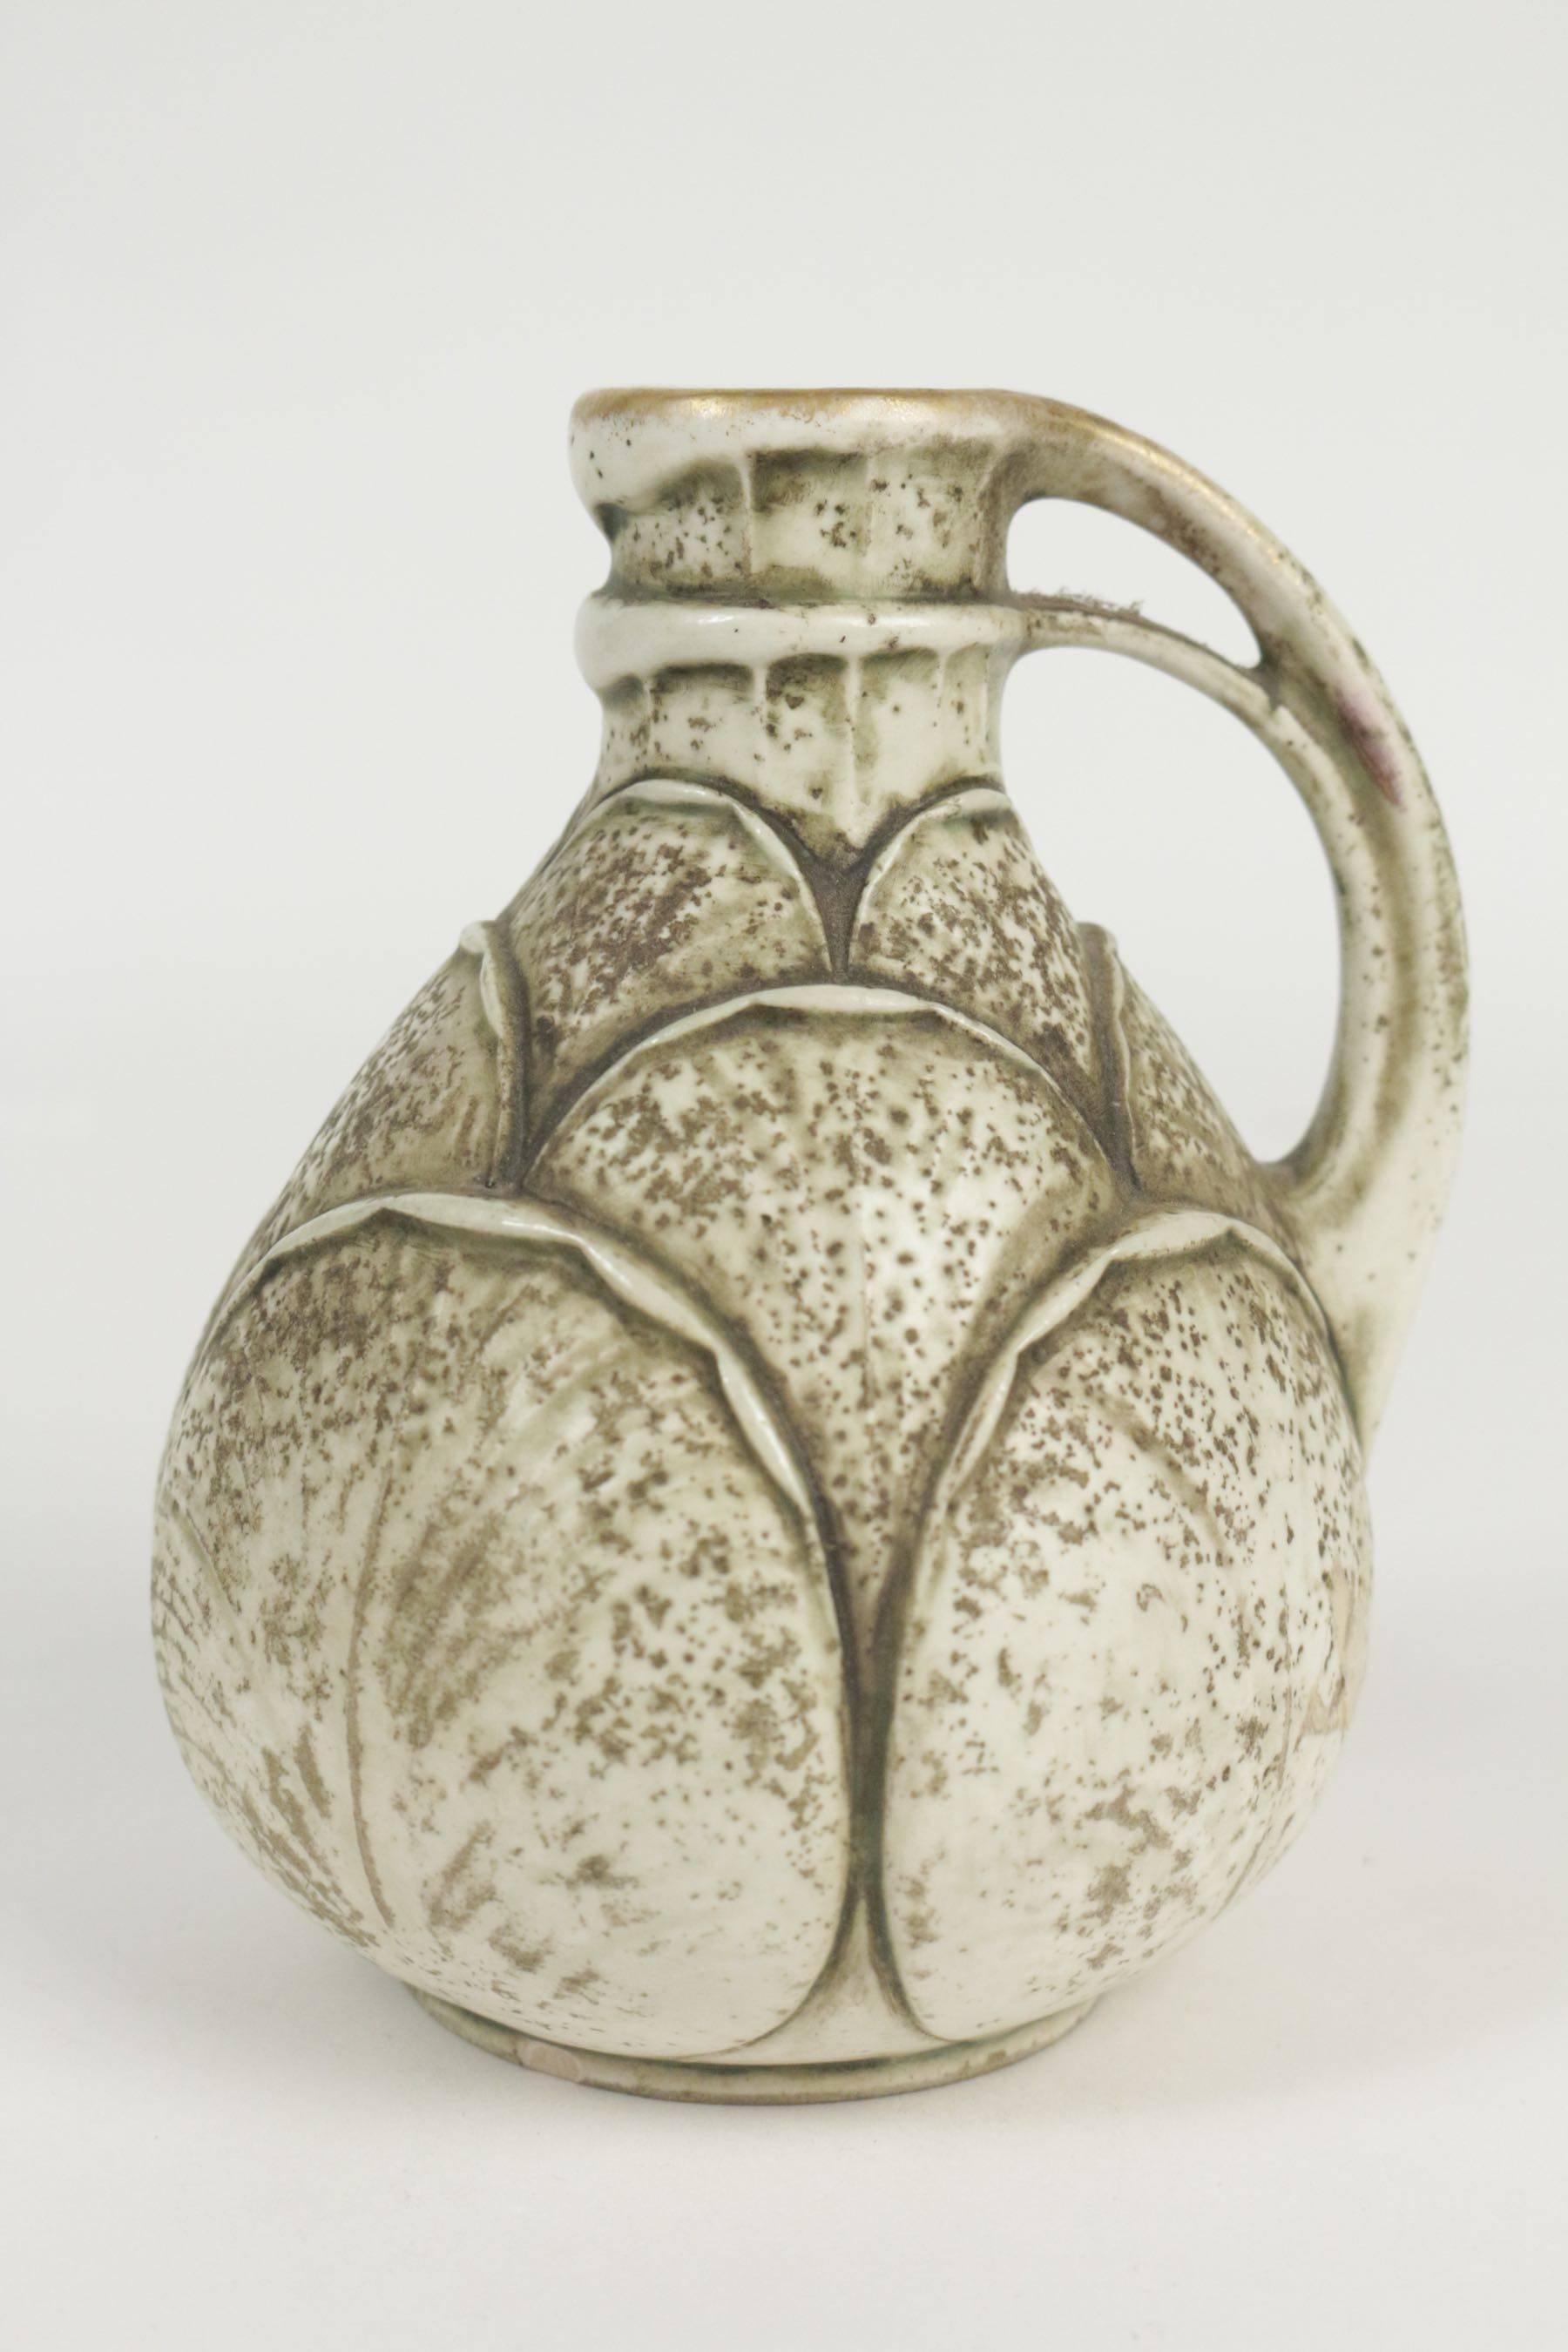 Amphora vase shaped like a cauliflower, Viennese, Austria from the beginning of the 20th century.
 